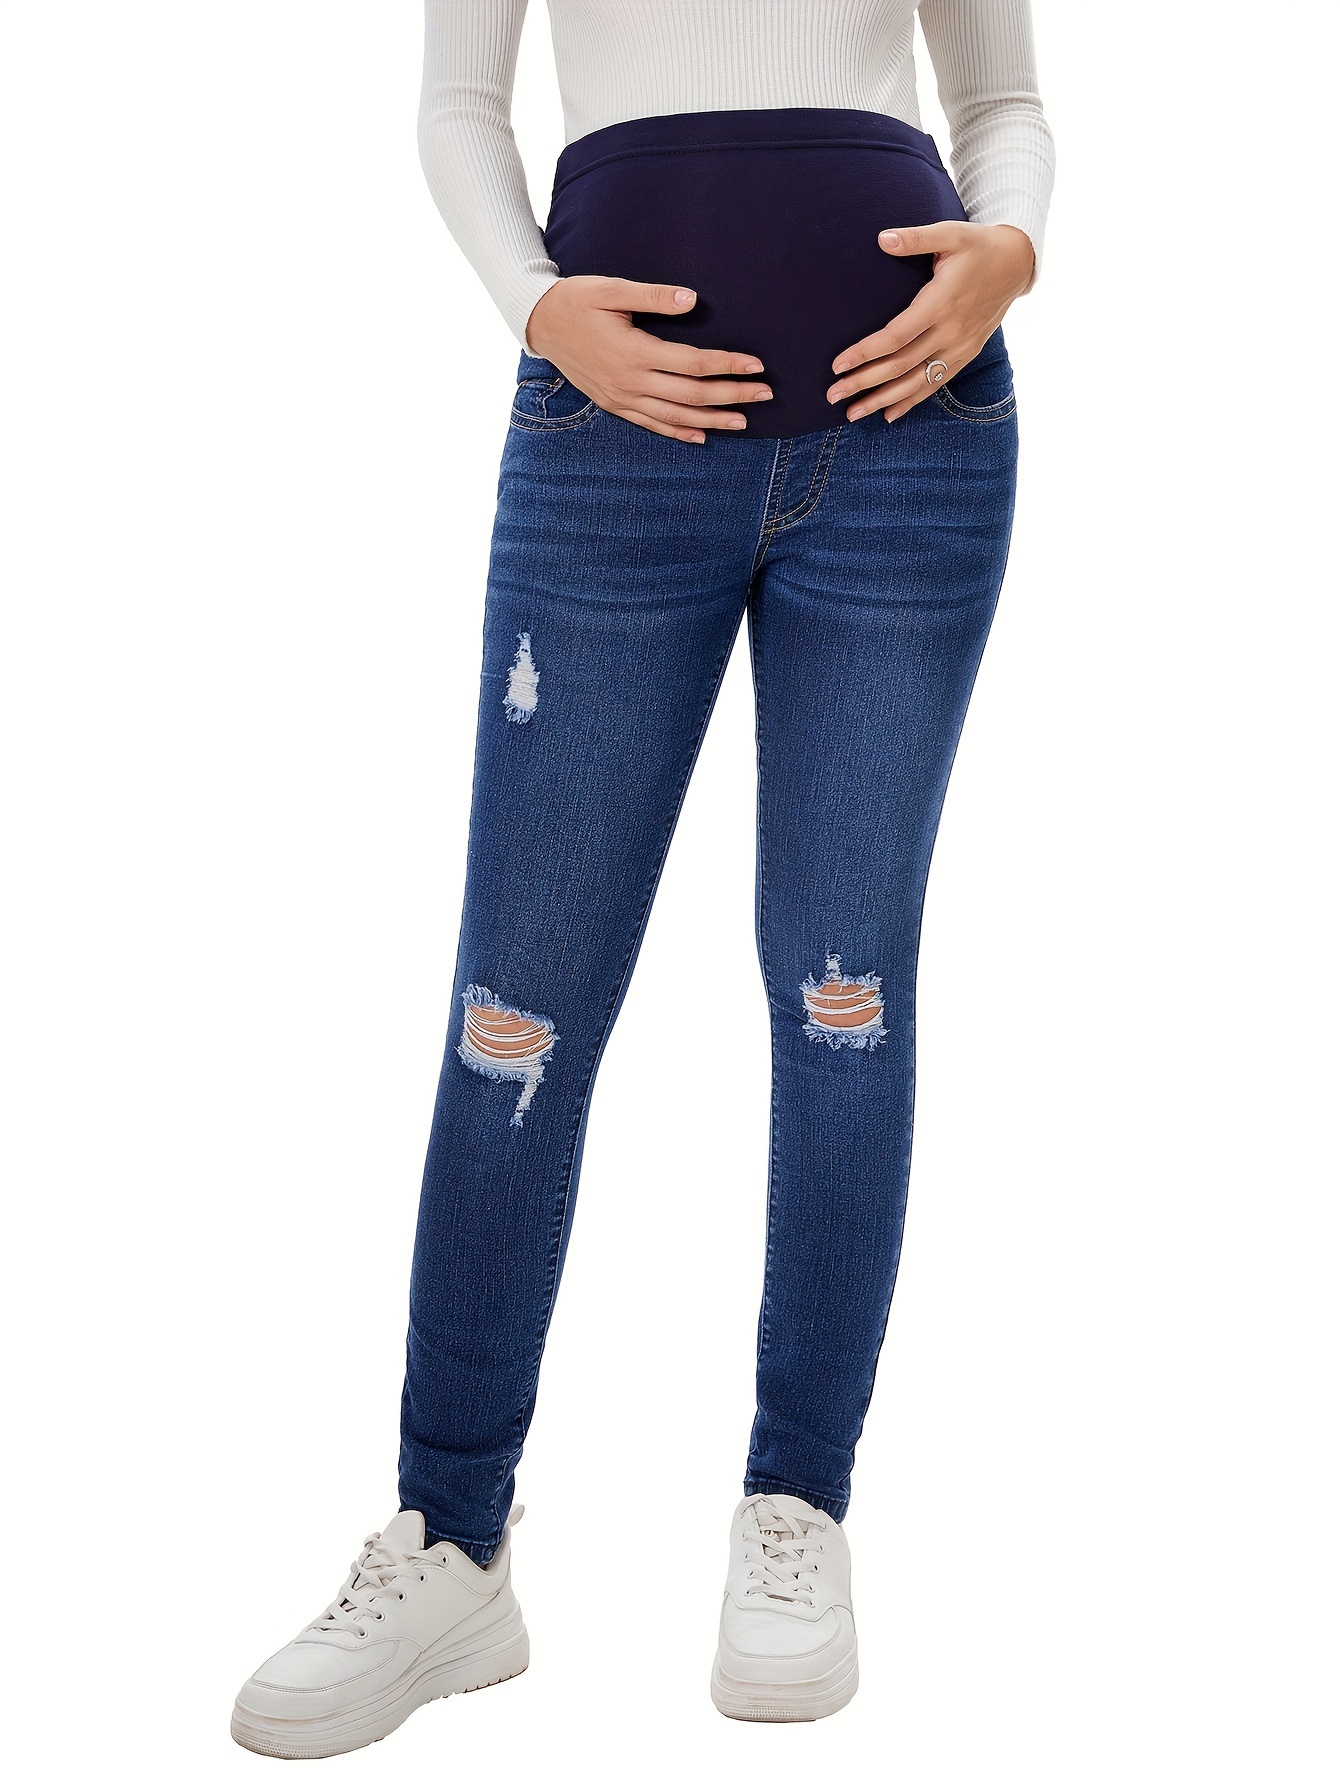 skpabo Pregnant Women Jeans,Fashion Solid Blue Maternity Trousers Slim Fit  Skinny Ripped Jeans Pregnant Over The Bump Vintage Denim Leggings,M-2XL 